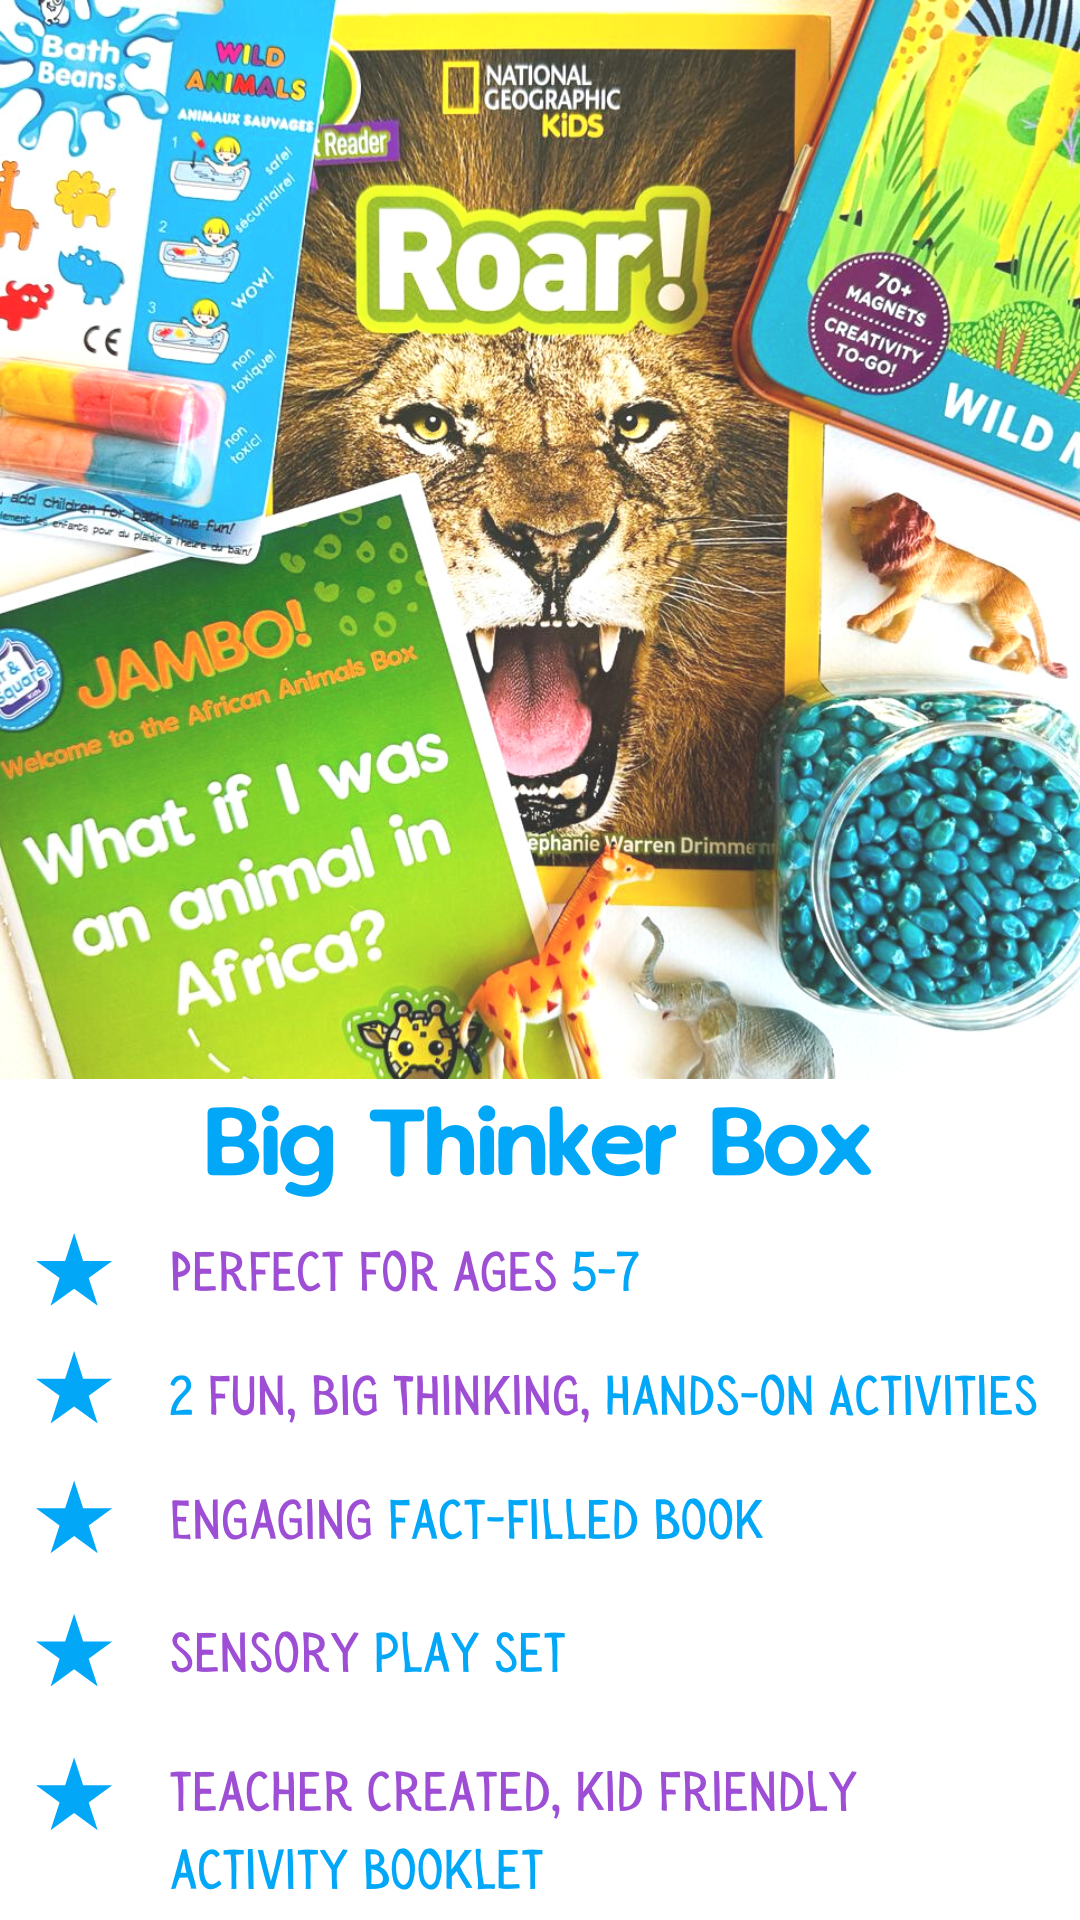 Big Thinker Box: Perfect for ages 5-7. 2 fun, big thinking, hands-on activities. Sensory play set. Teacher created, kid friendly activity book. 